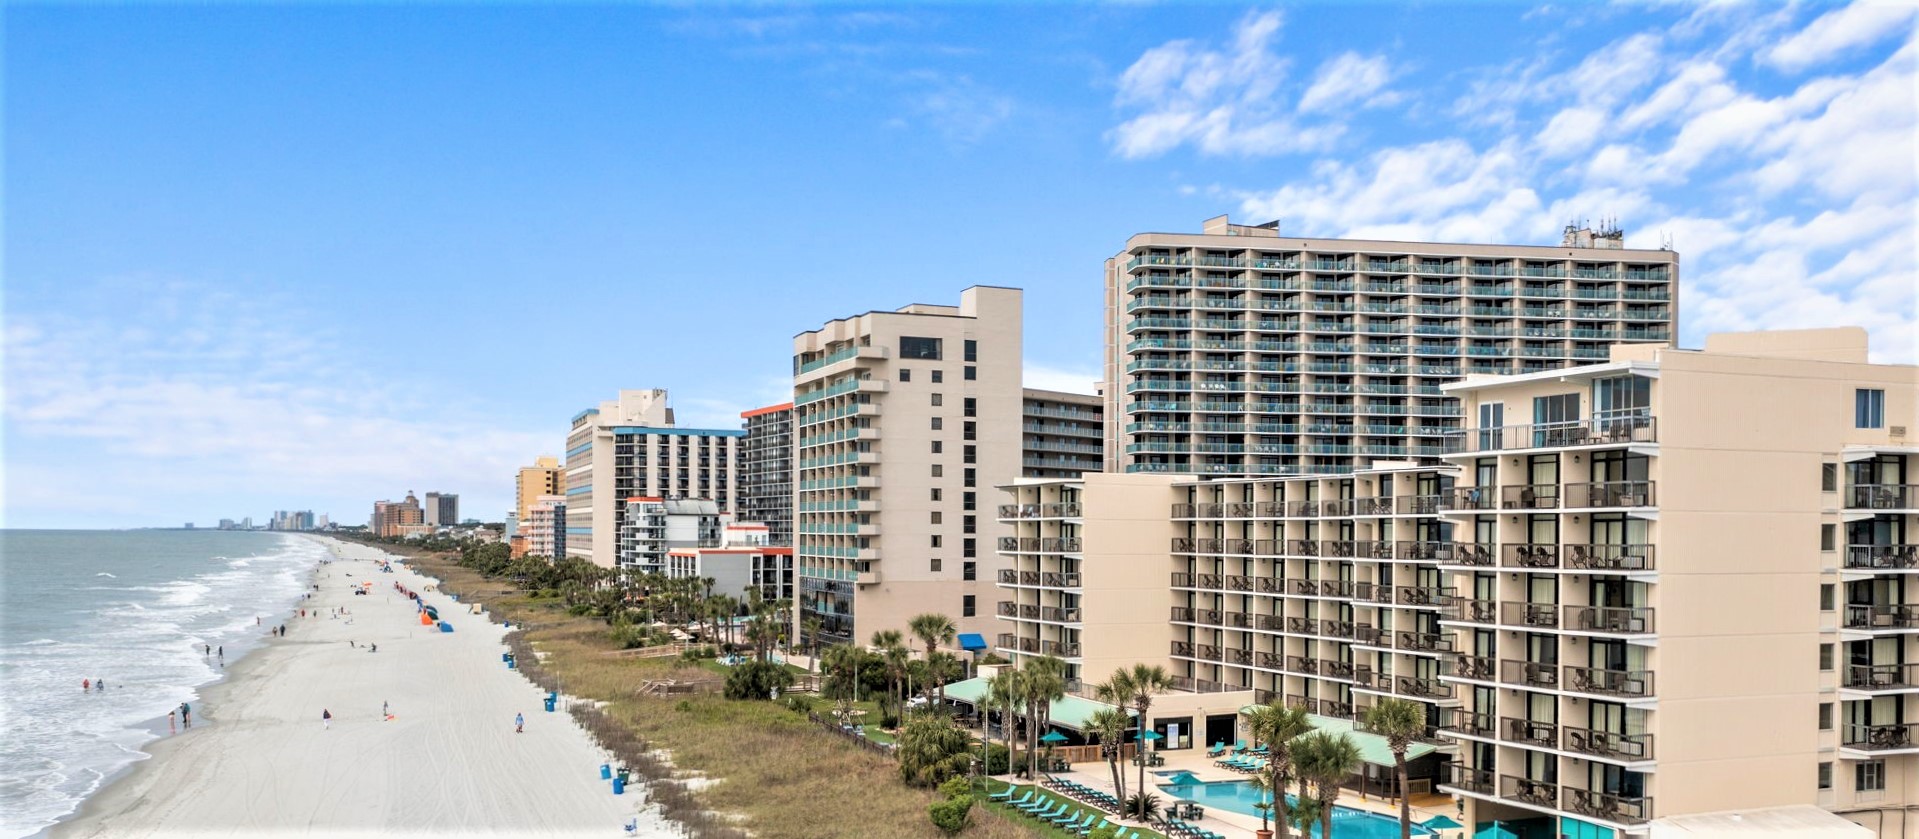 Things to Do in Myrtle Beach - Myrtle Beach Activities